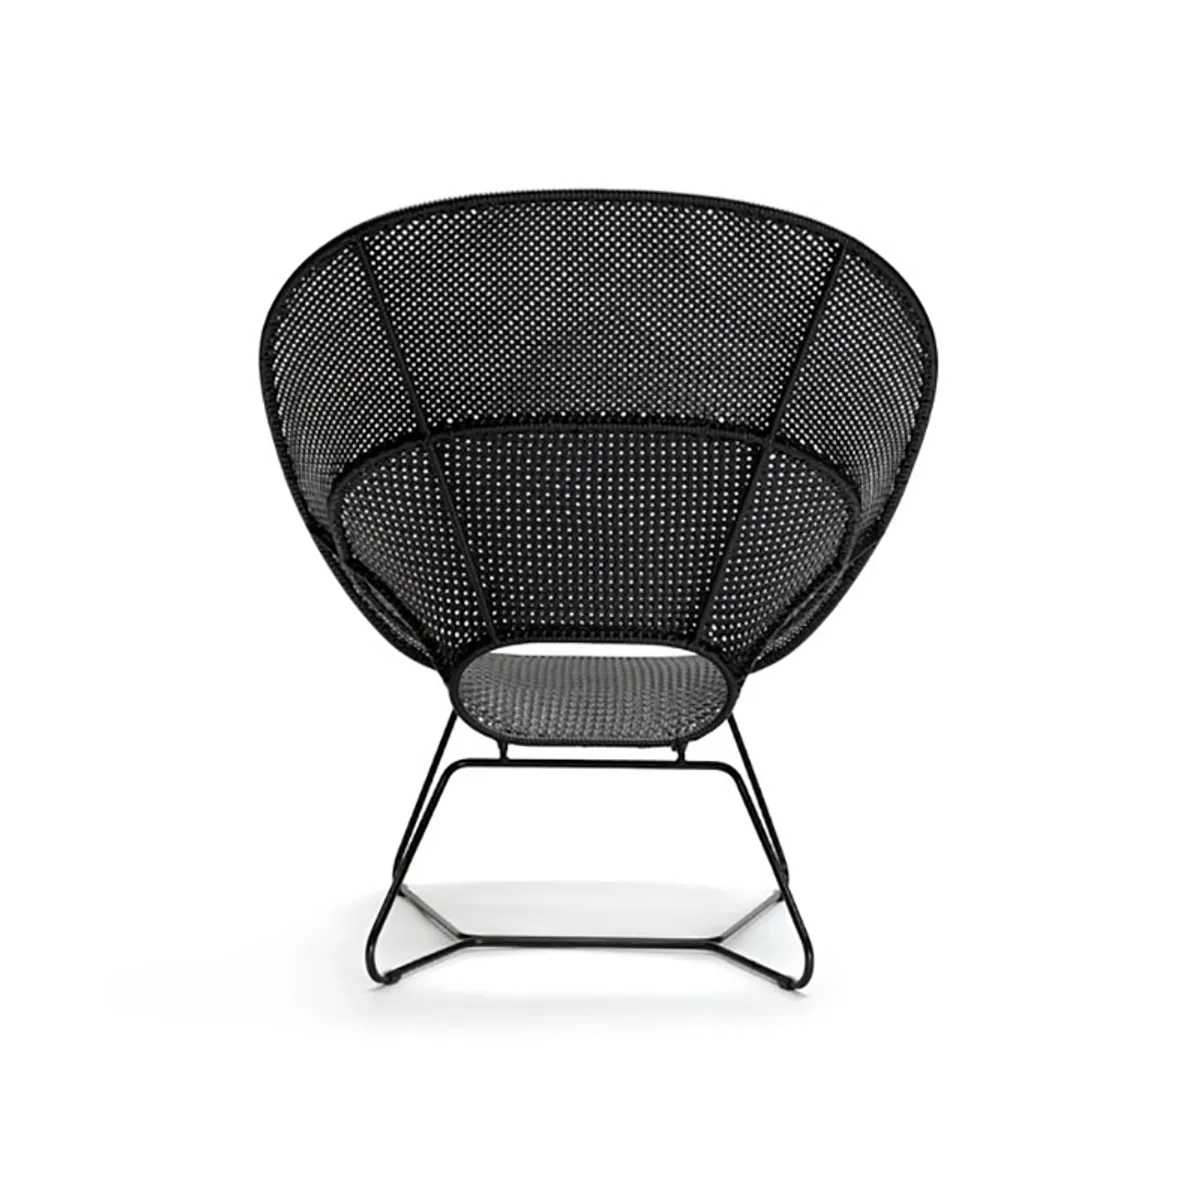 Trombone Outdoor Lounge Chair Black Rattan Furniture For Hotels And Poolside Cafes 014